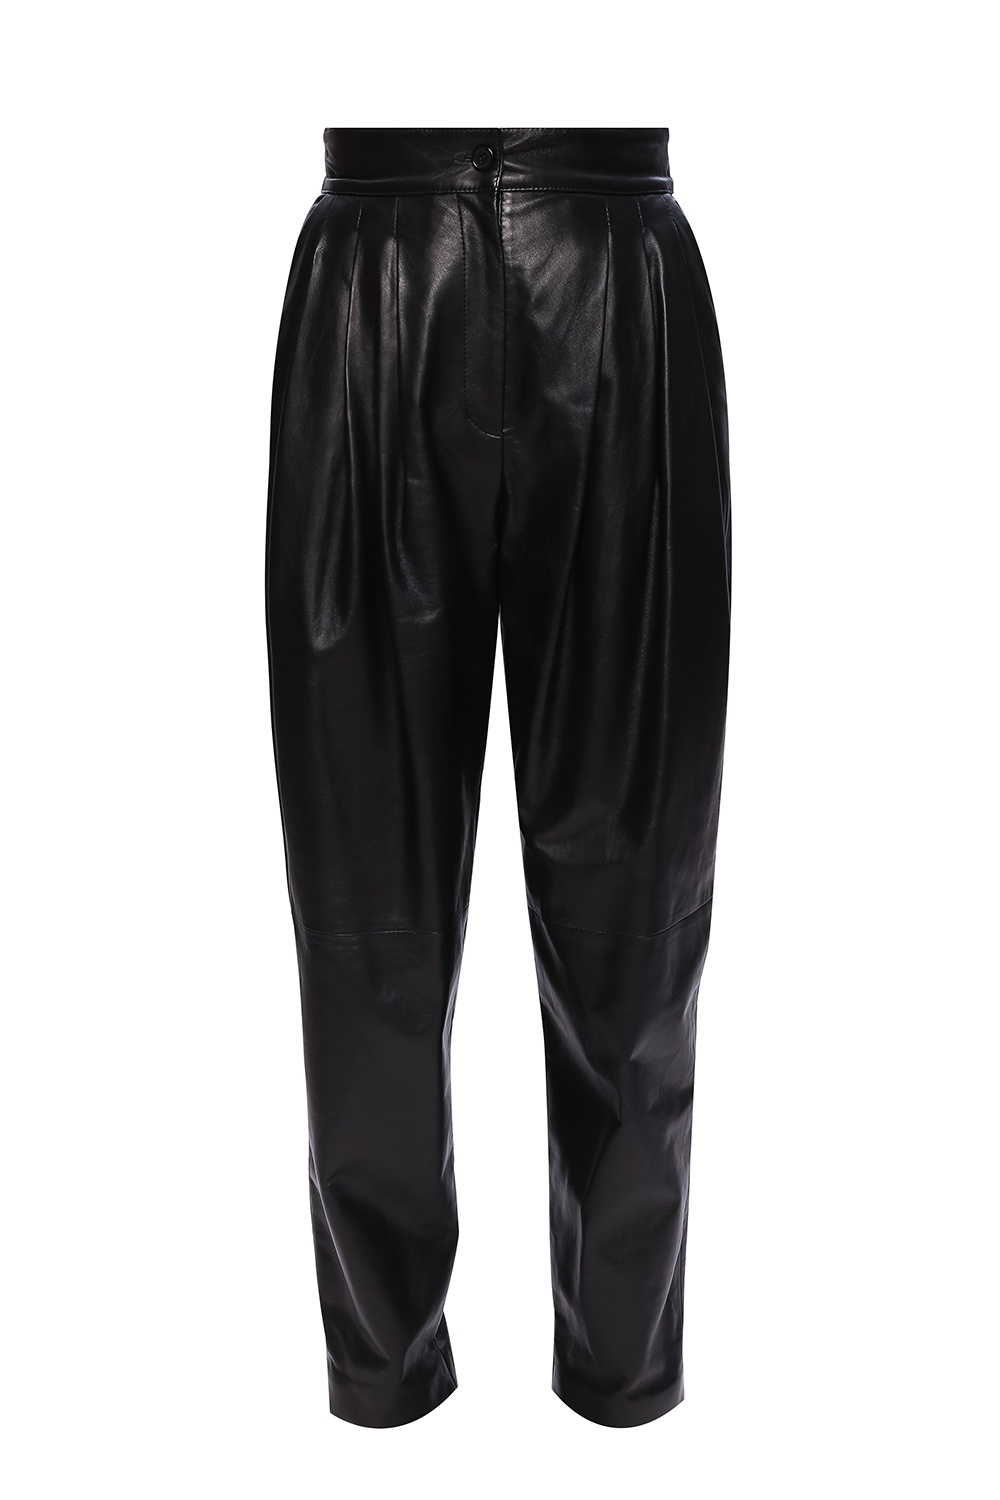 Dolce & Gabbana Leather trousers